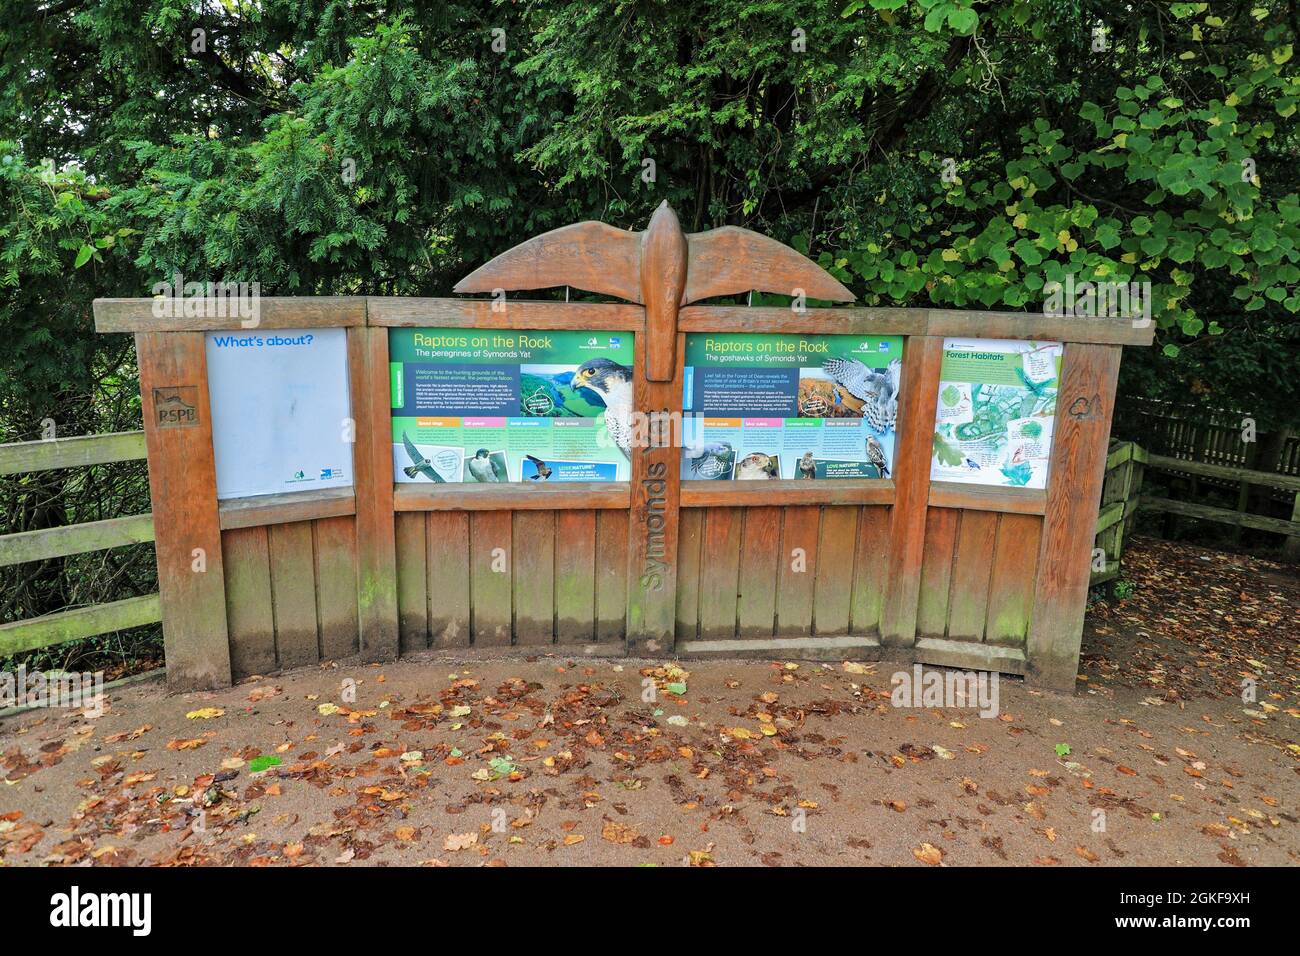 An RSPB (Royal Society for the protection of Birds) information board at Symonds Yat, Gloucestershire, England, UK Stock Photo